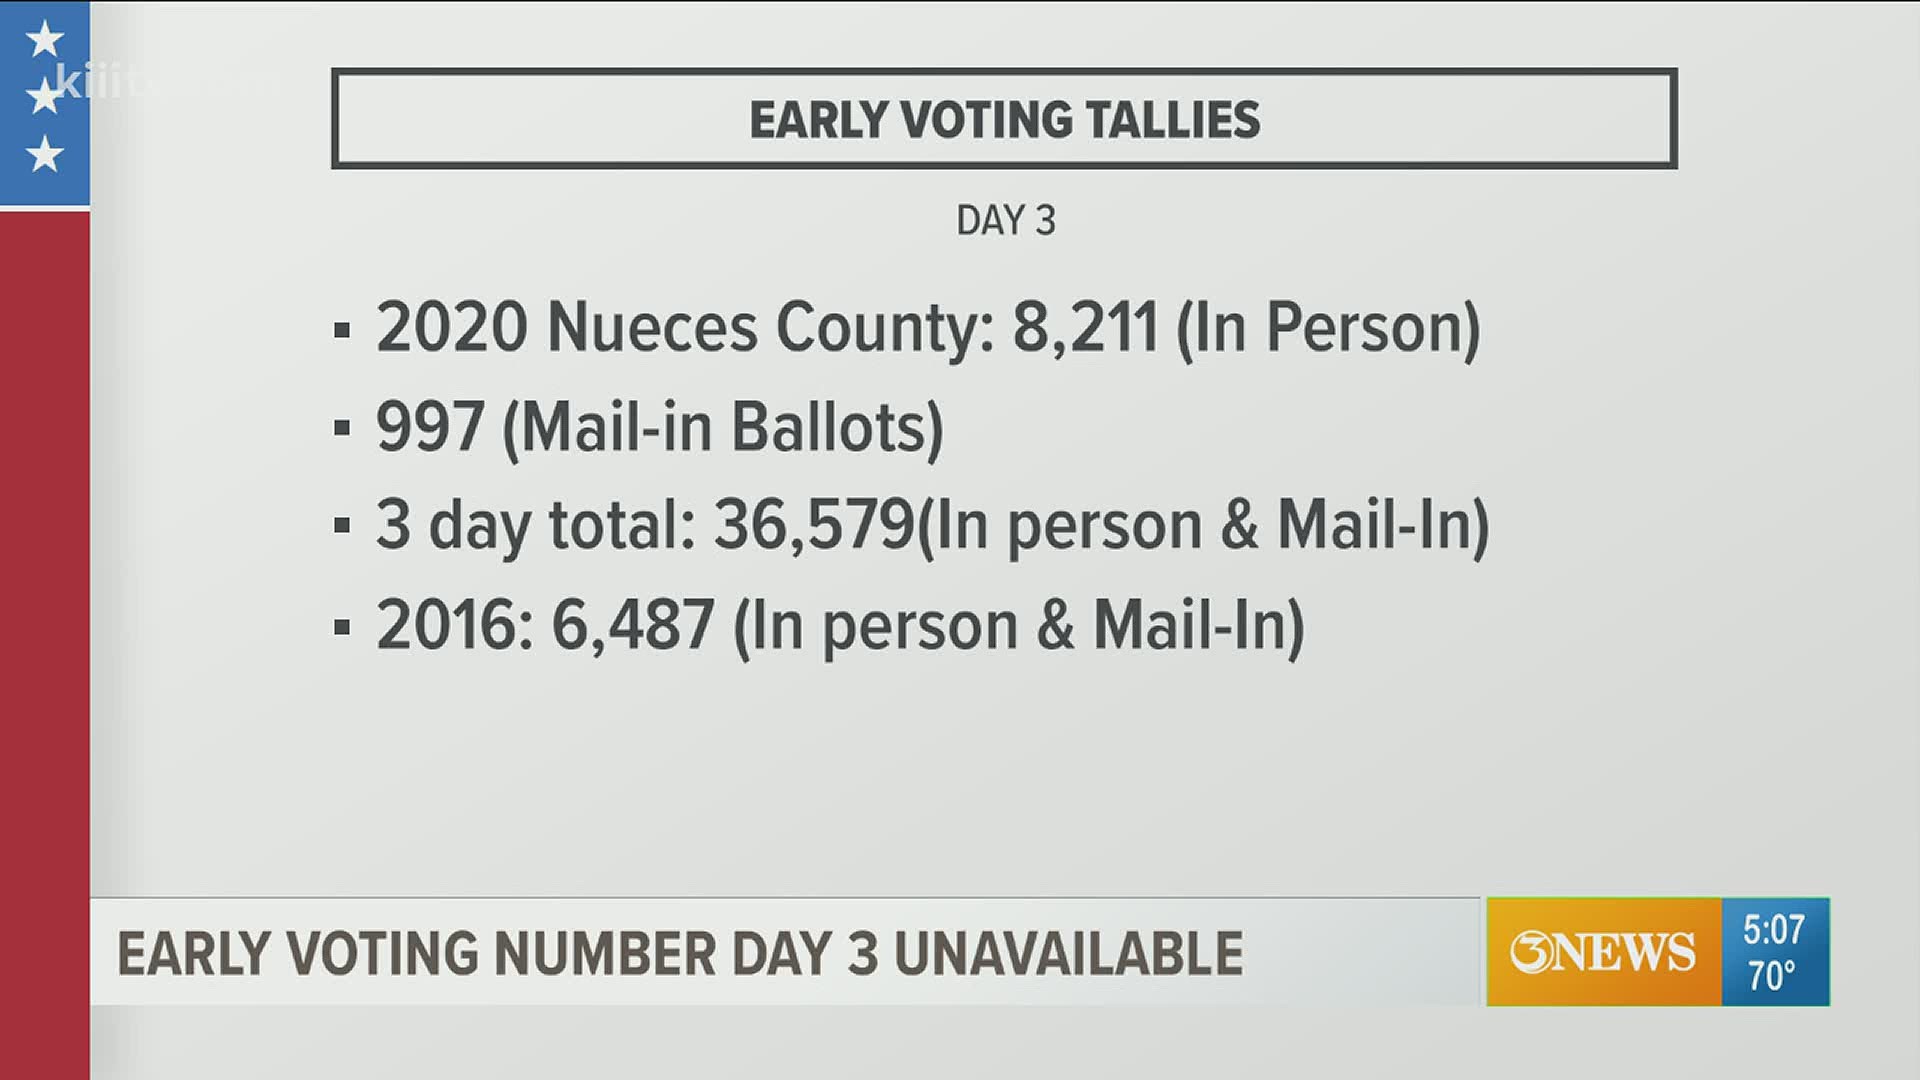 More than 35,000 voters in Nueces County have cast their ballots this election season.